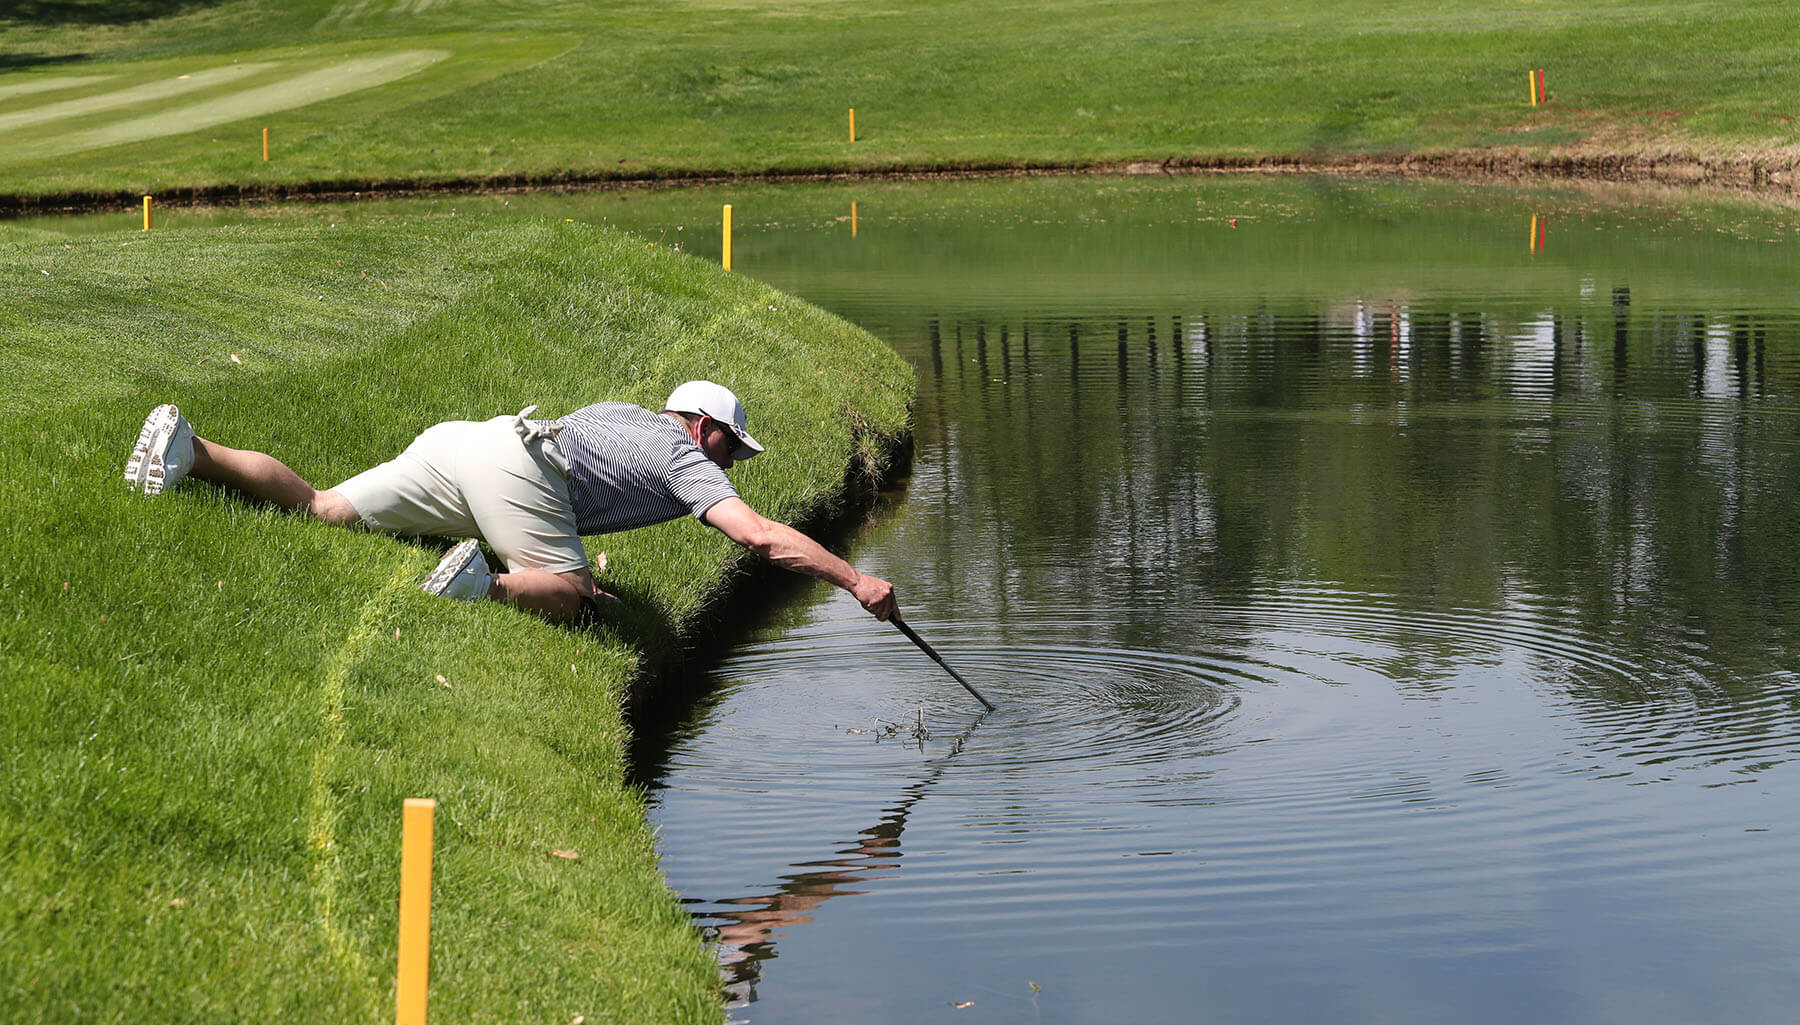 A player looking for a drowned golf ball in a water hazard